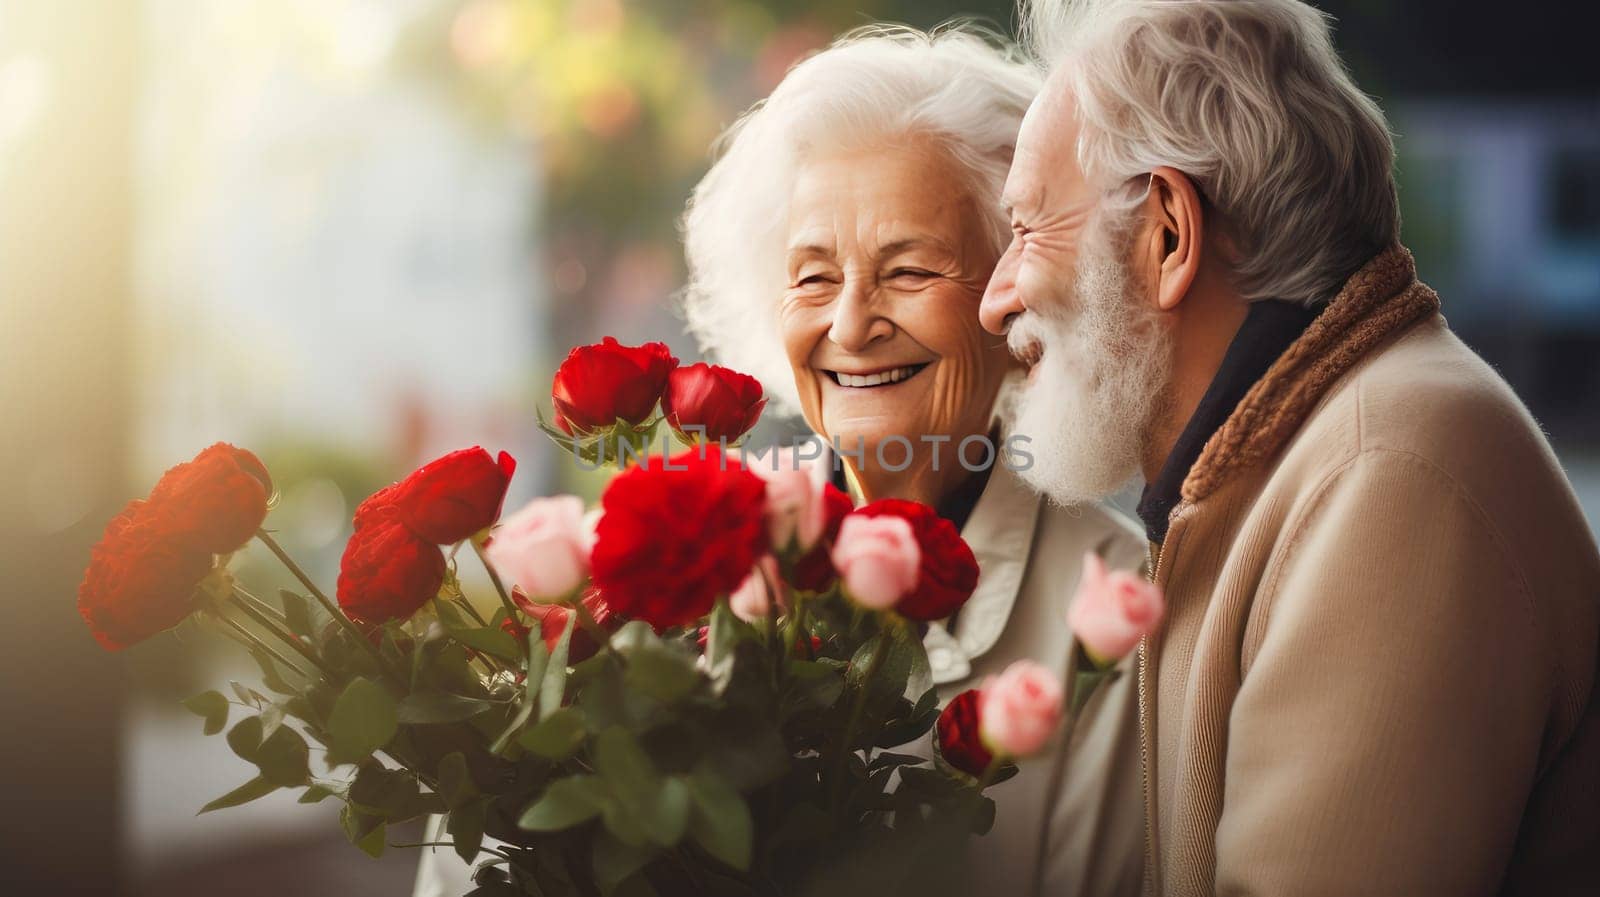 Gorgeous, happy, smiling, handsome, sweet, elderly couple. A gray-haired husband gives a large bouquet of red roses to his happy, laughing wife in the house near the window. by Alla_Yurtayeva